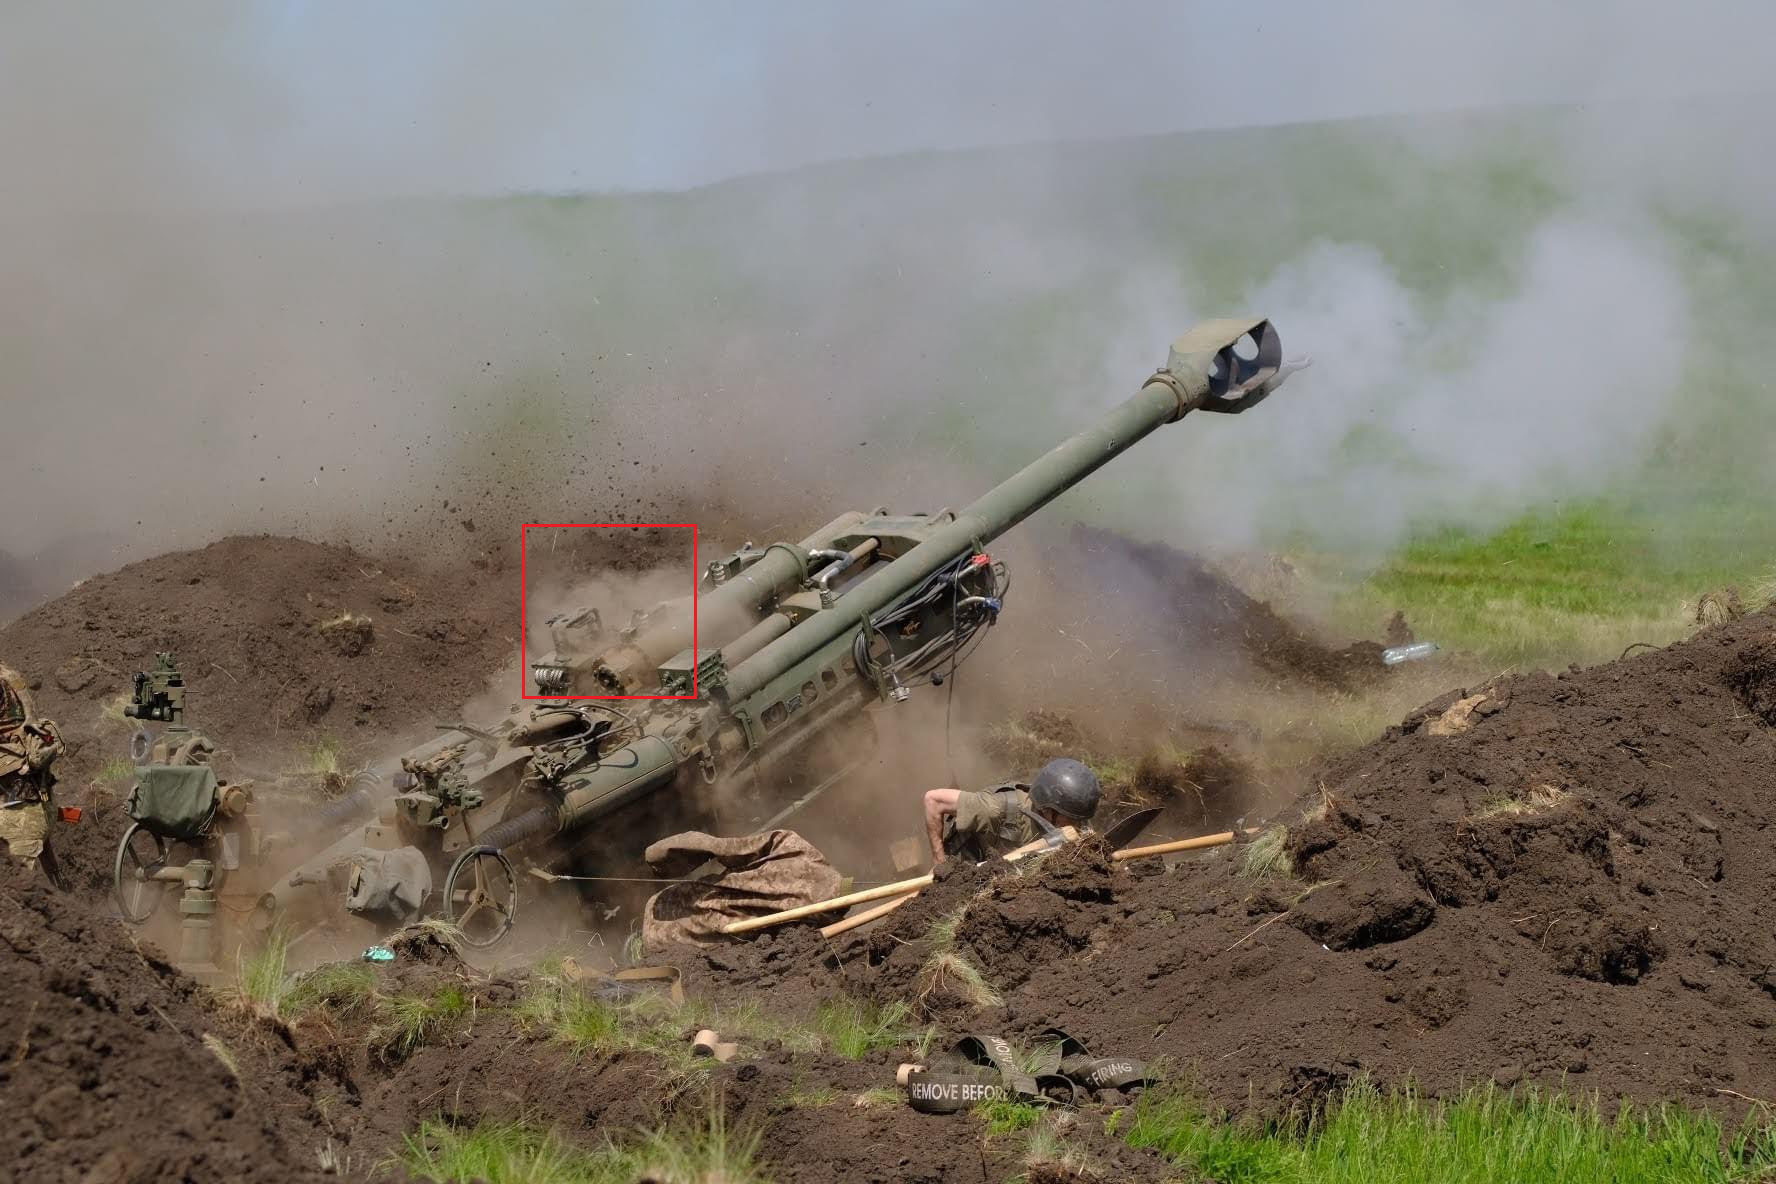 Trust Issues: US Removed Digital Fire Control Systems From M777 Howitzers Supplied To Kiev Forces